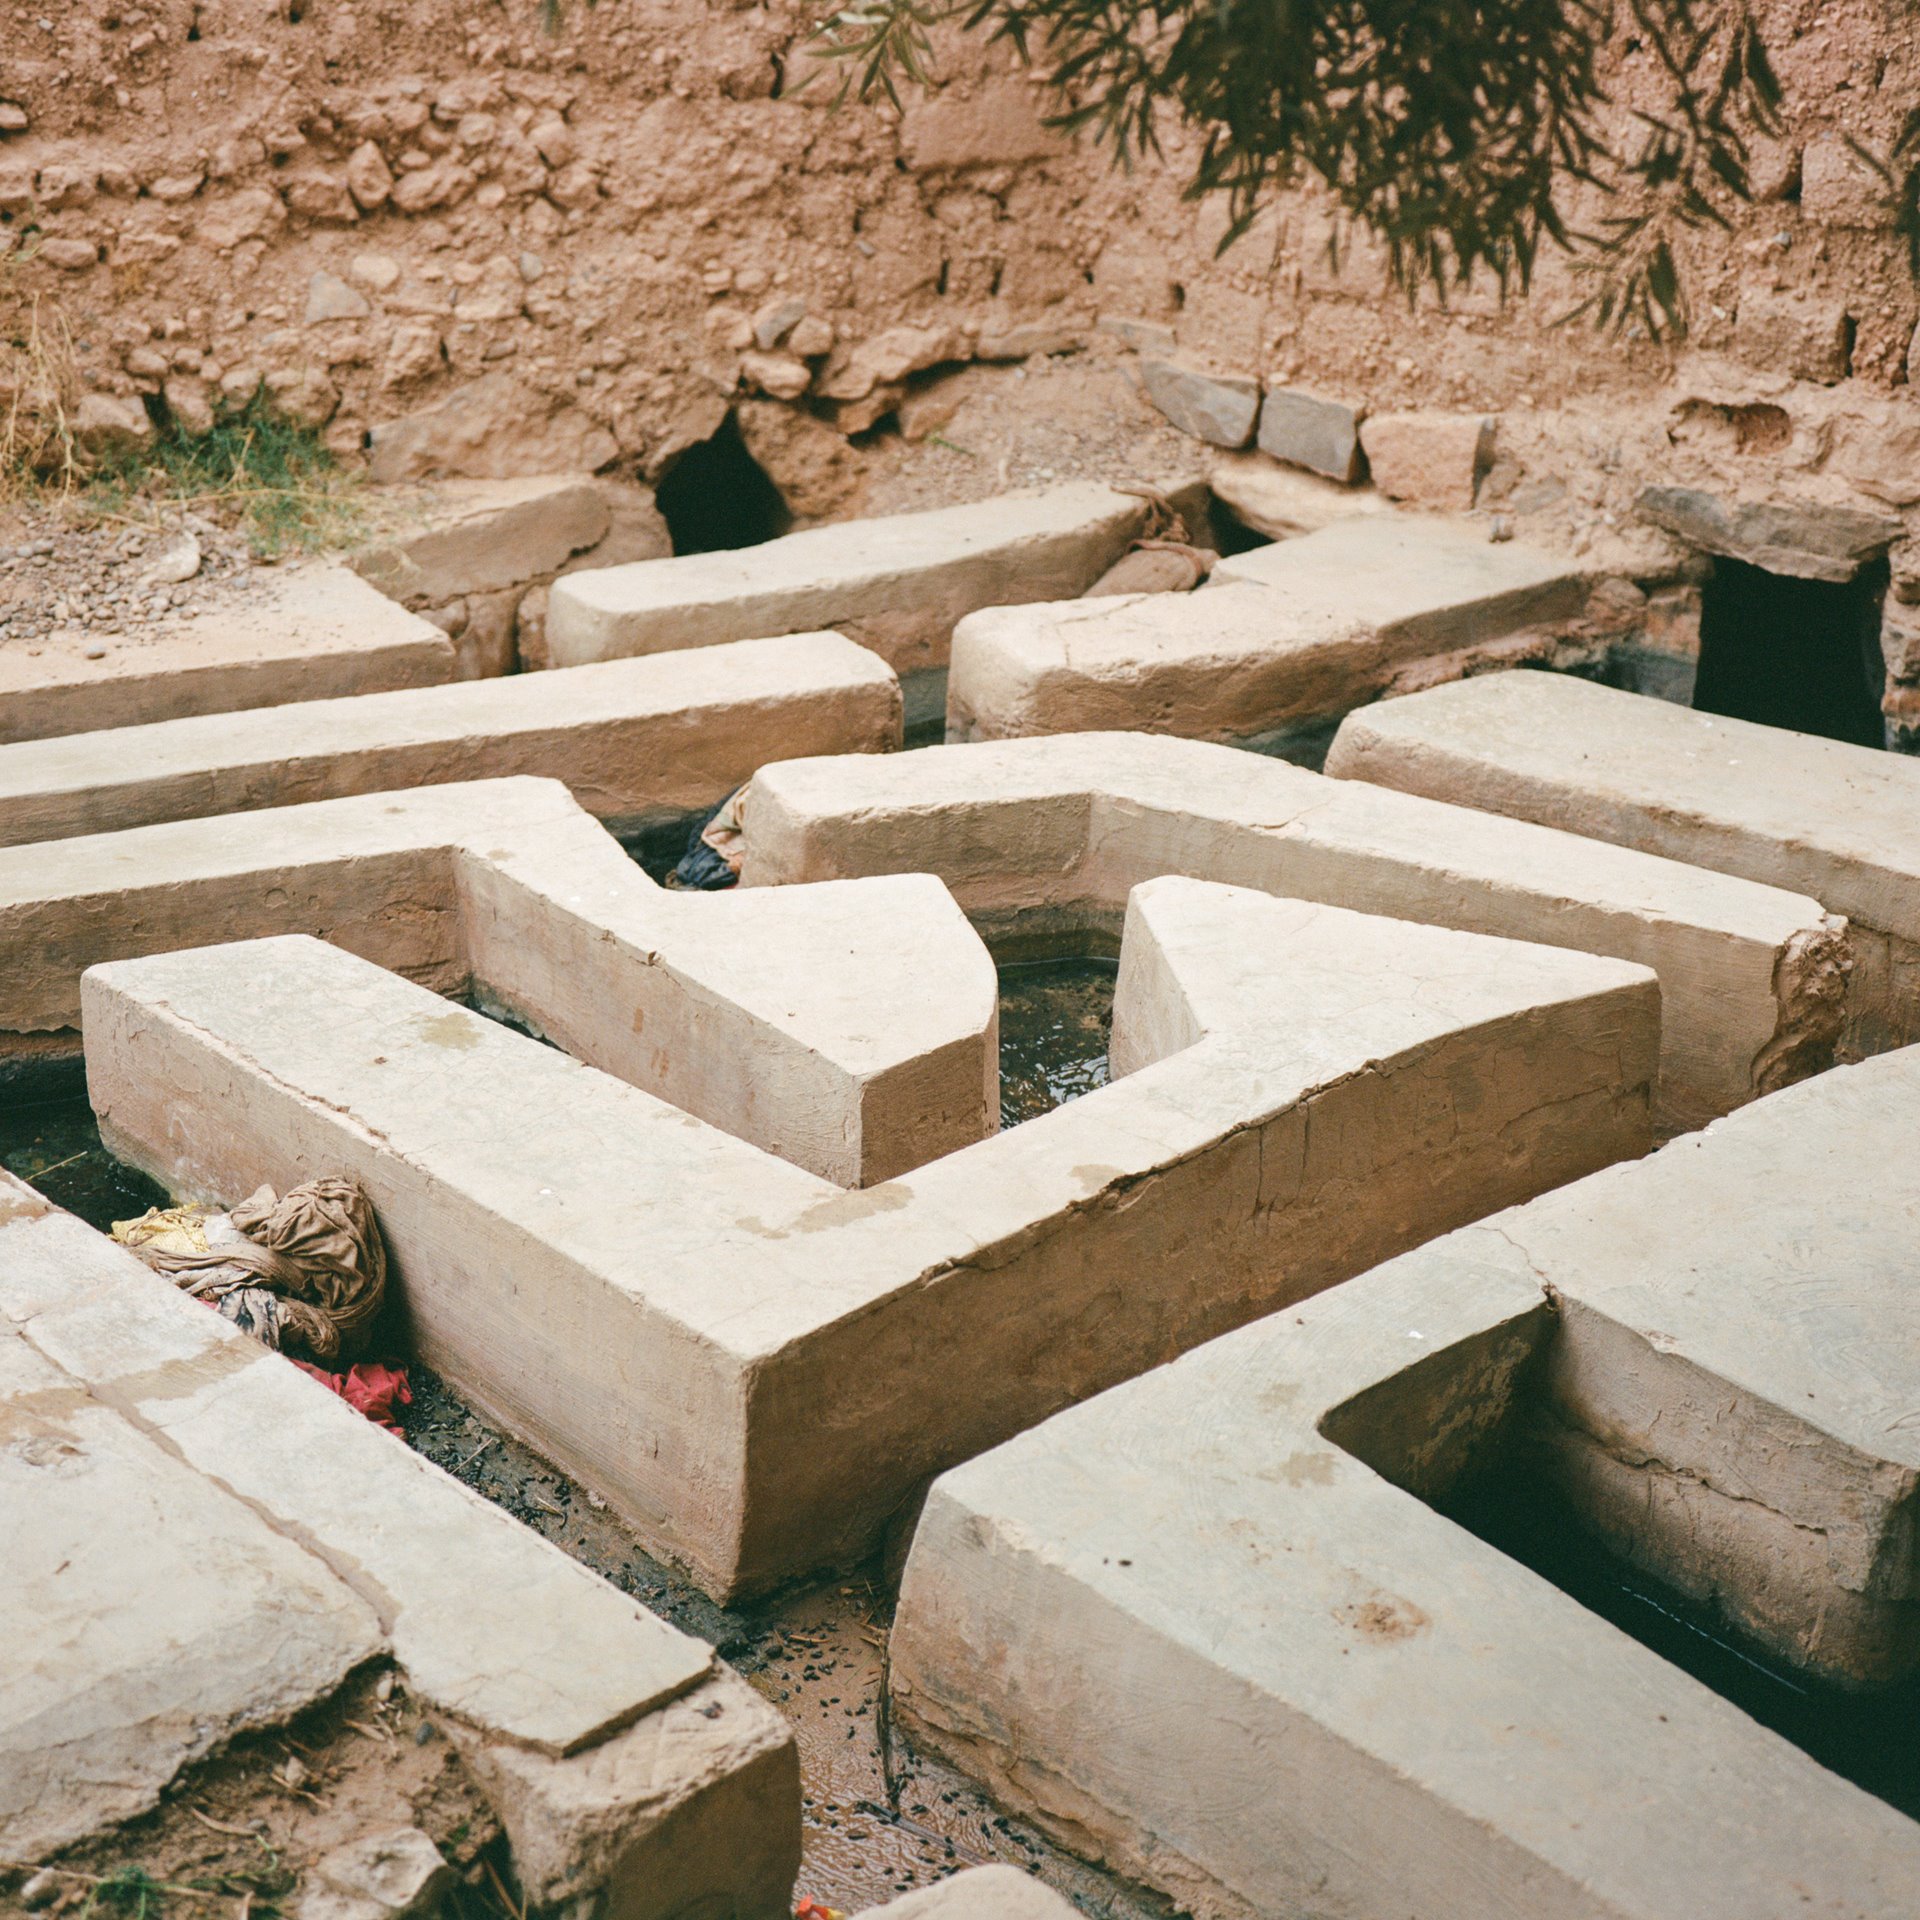 <p>Allocations of water are transferred via stone dividers to users of a traditional irrigation system, at Figuig Oasis, in eastern Morocco. The allocations and amounts are set according to the original contribution participants made at the time the system was constructed. The rights are inherited, and may be divided and passed on by marriage or sale.</p>
